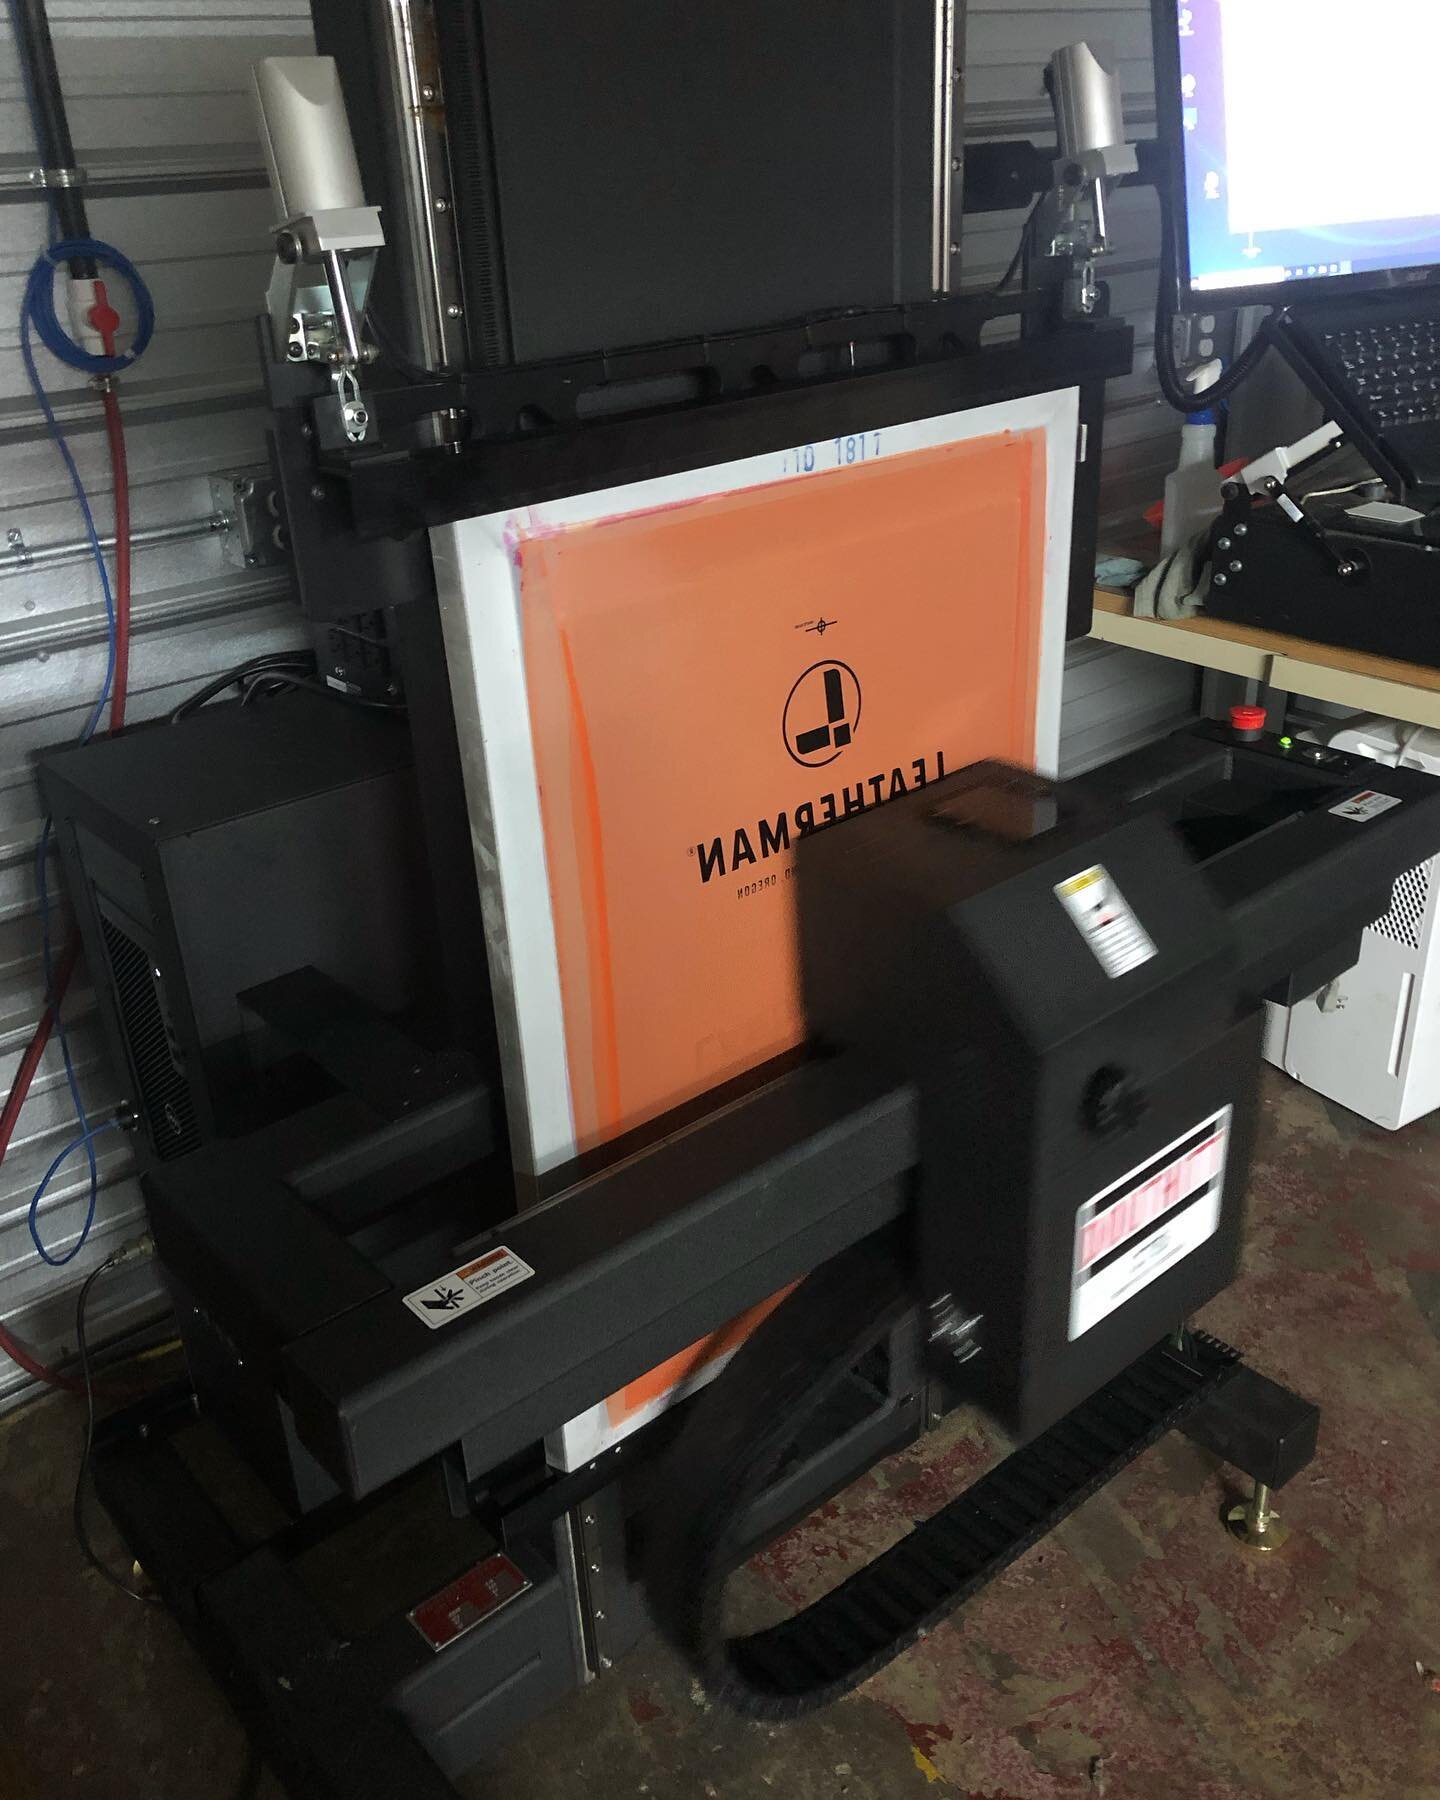 Welcome to the WEARhouse fam CTS unit by Douthitt! CTS stands for &ldquo;computer to screen&rdquo; and allows us to image our designs straight onto our screens and helps us gain detail and precision when it comes to registering jobs on press. The ave